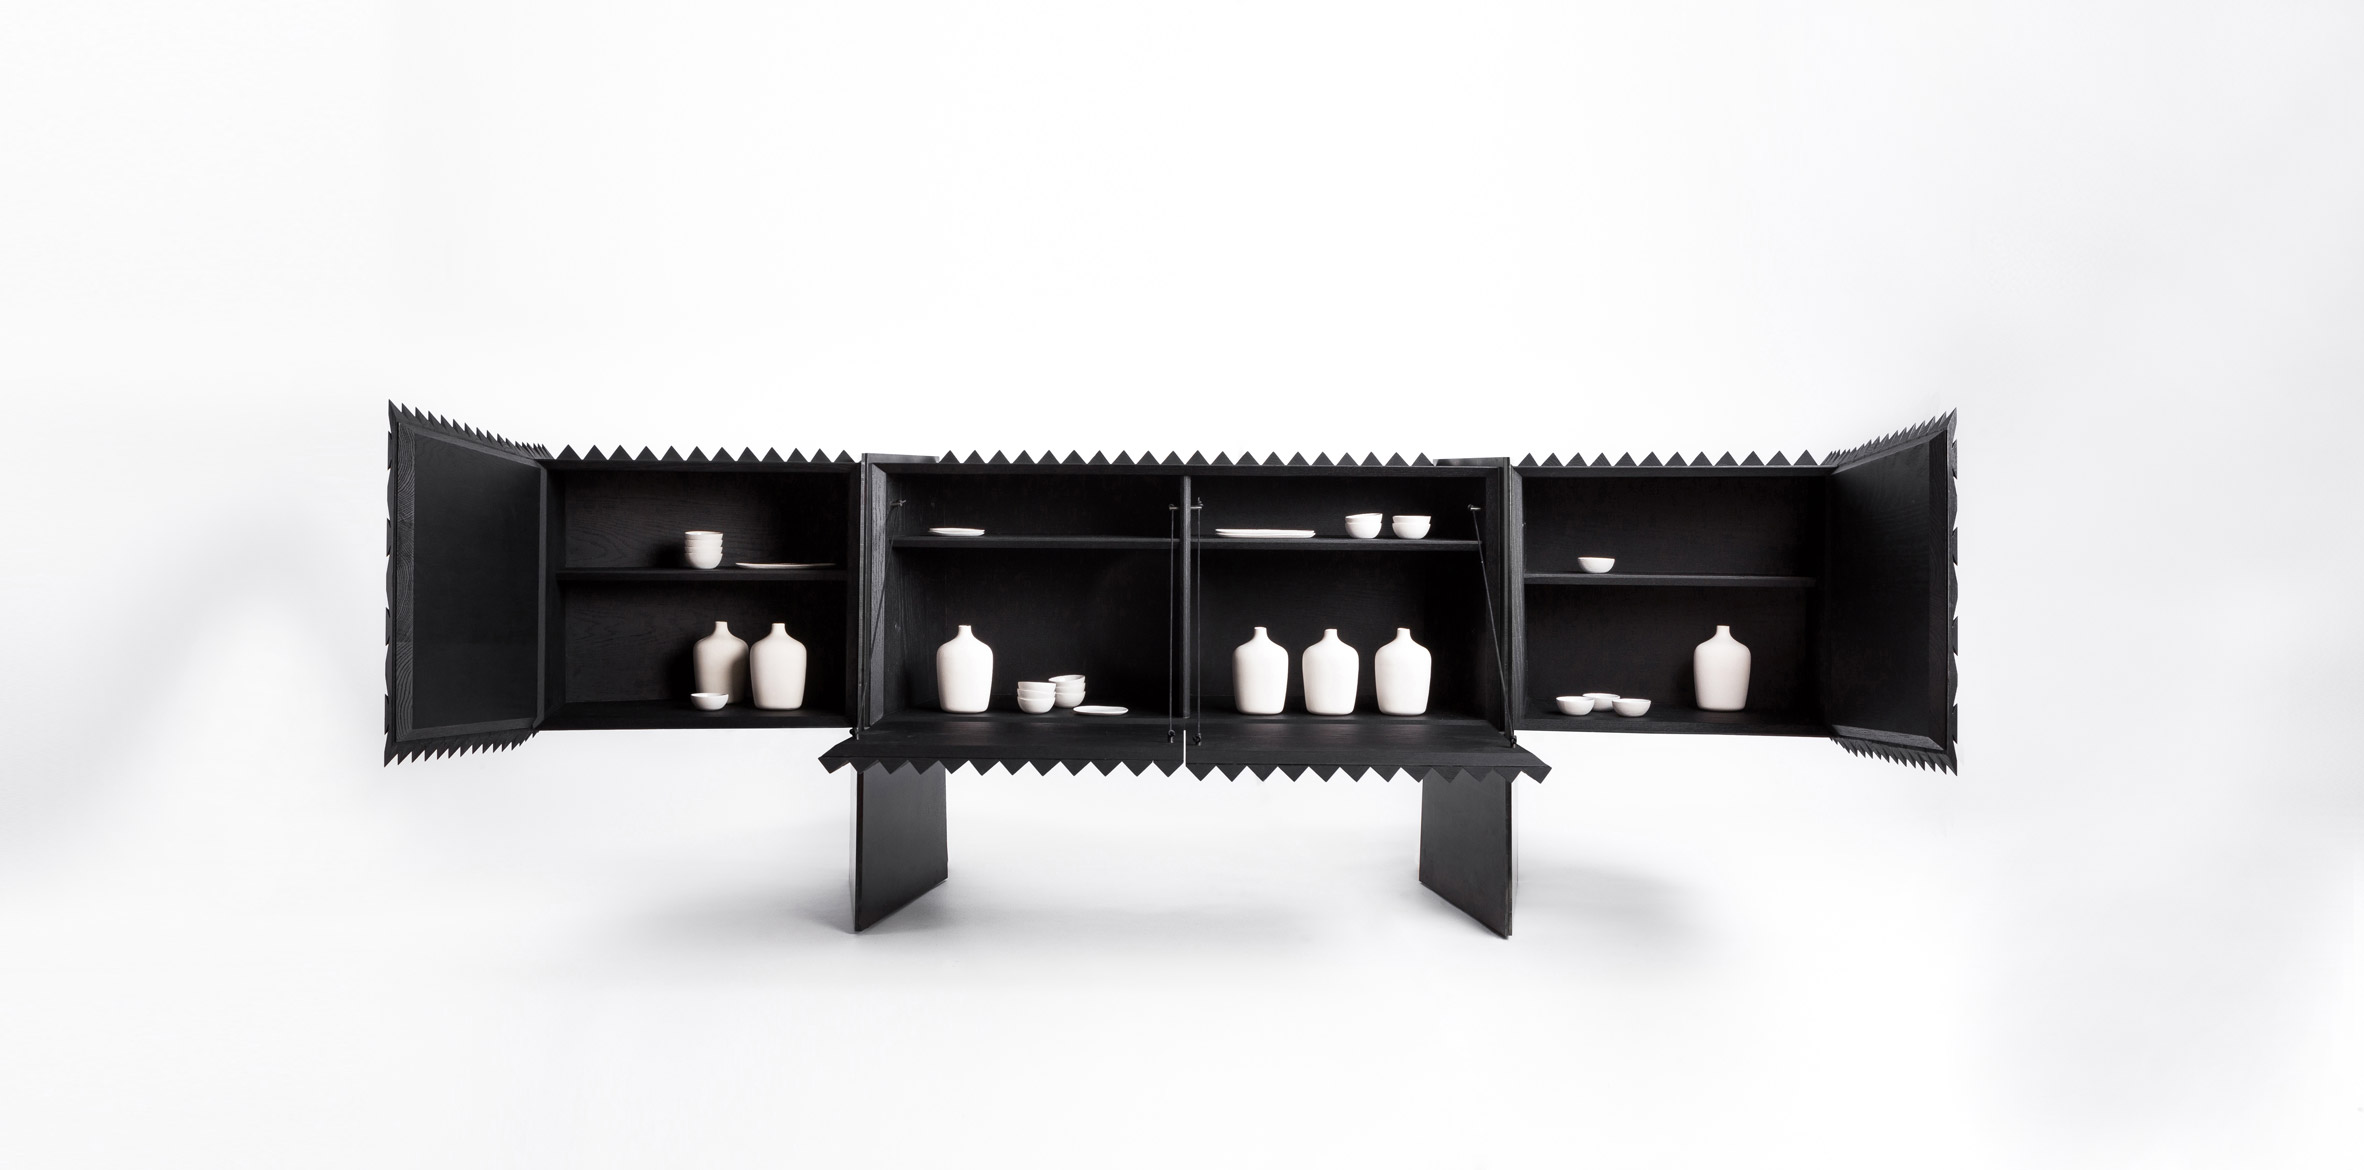 The Agave Cabinet by Esrawe Studio